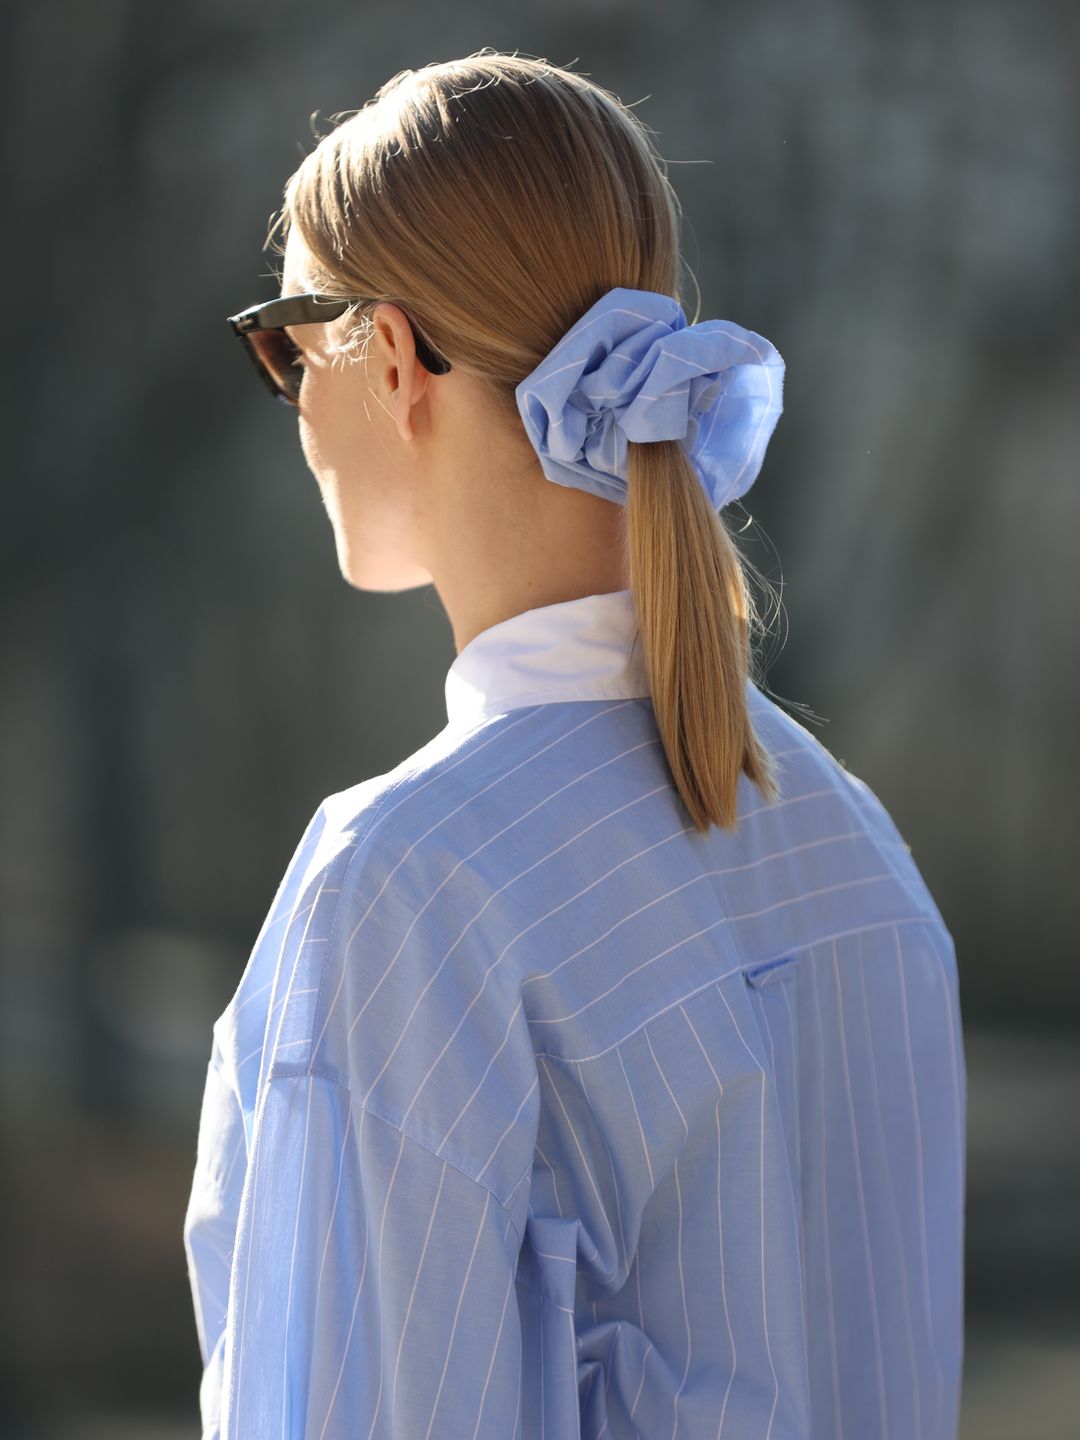 Spotted on the streets of Munich, this oversized scrunchie is working overtime to make this fit more than just a plain collared shirt ensemble